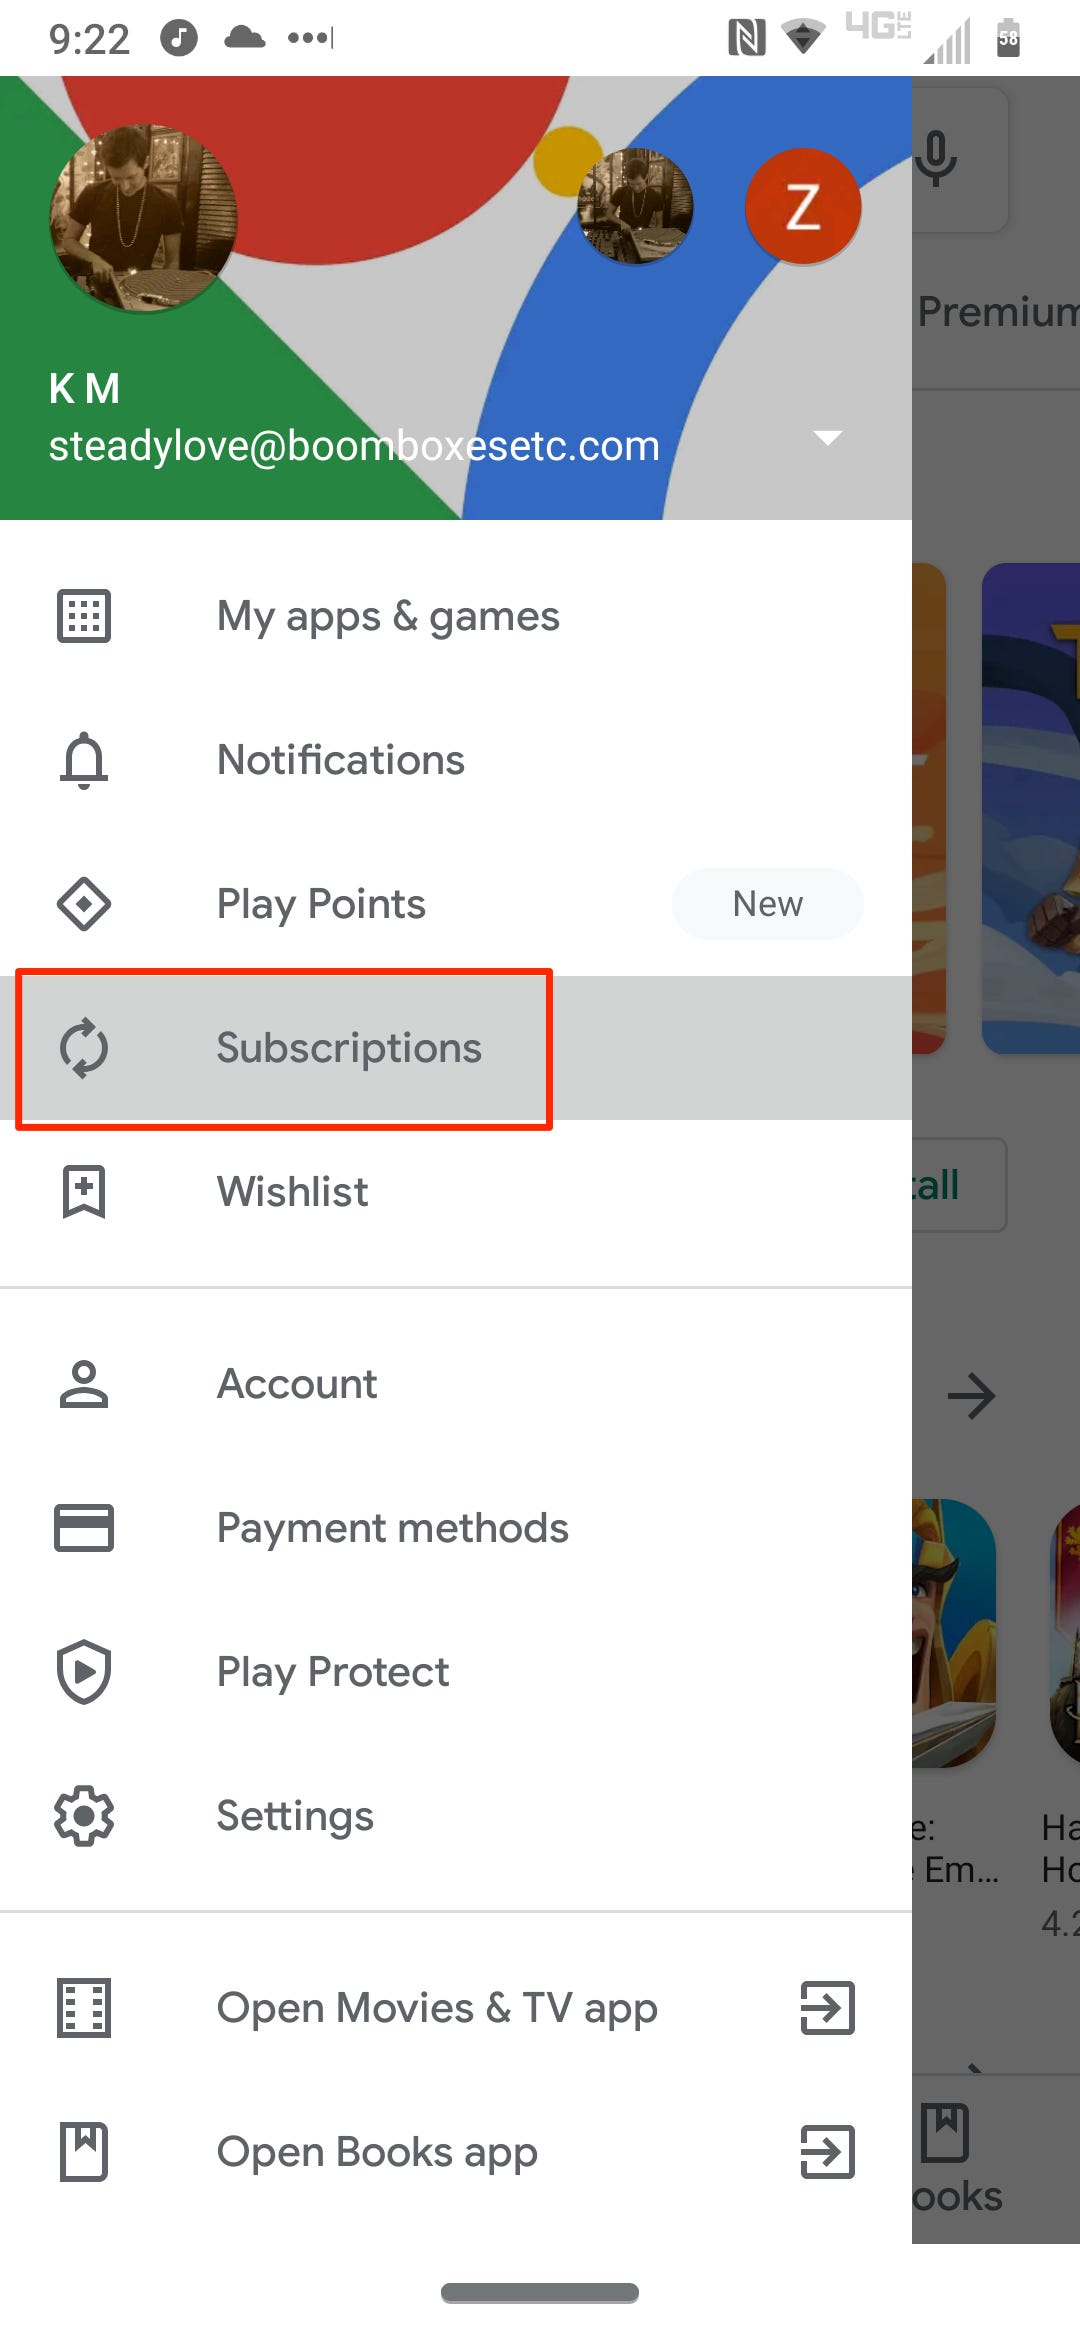 subscription on playstore